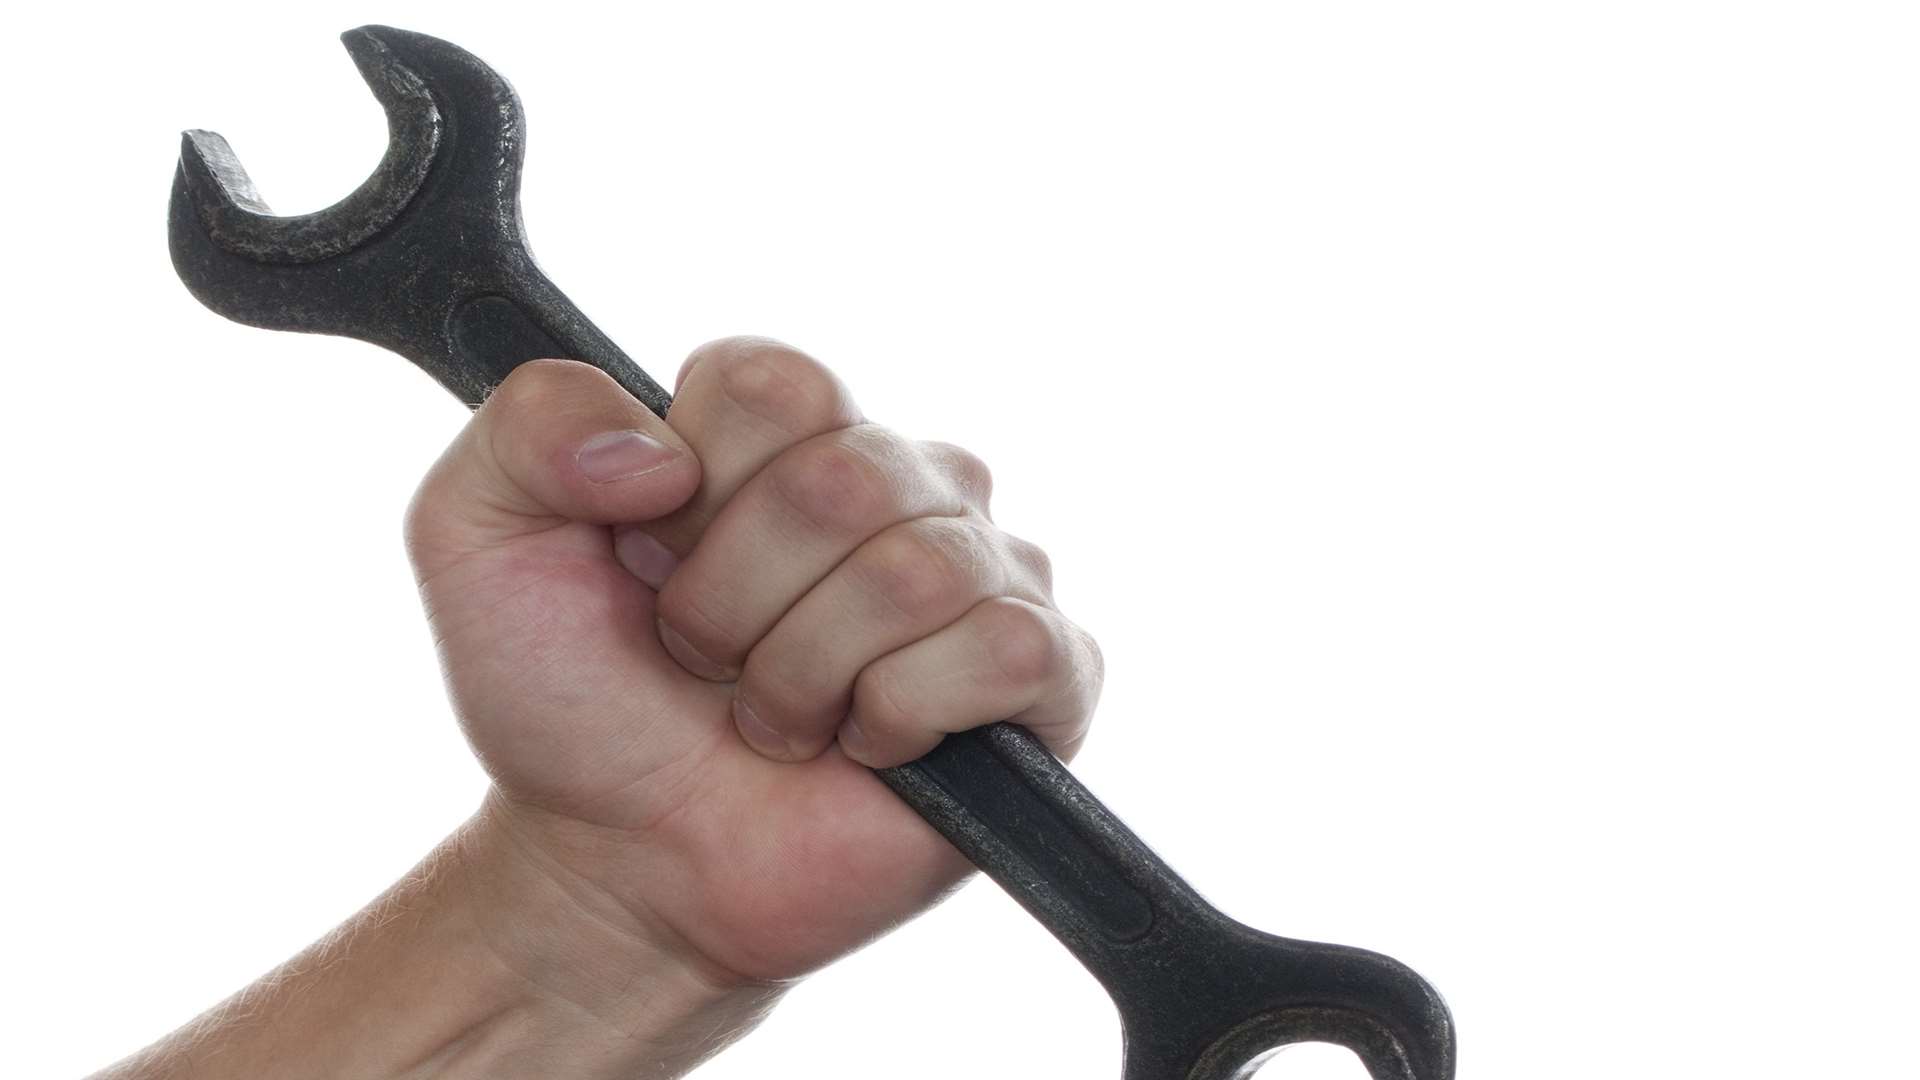 A spanner was allegedly used in the threat. Stock image.